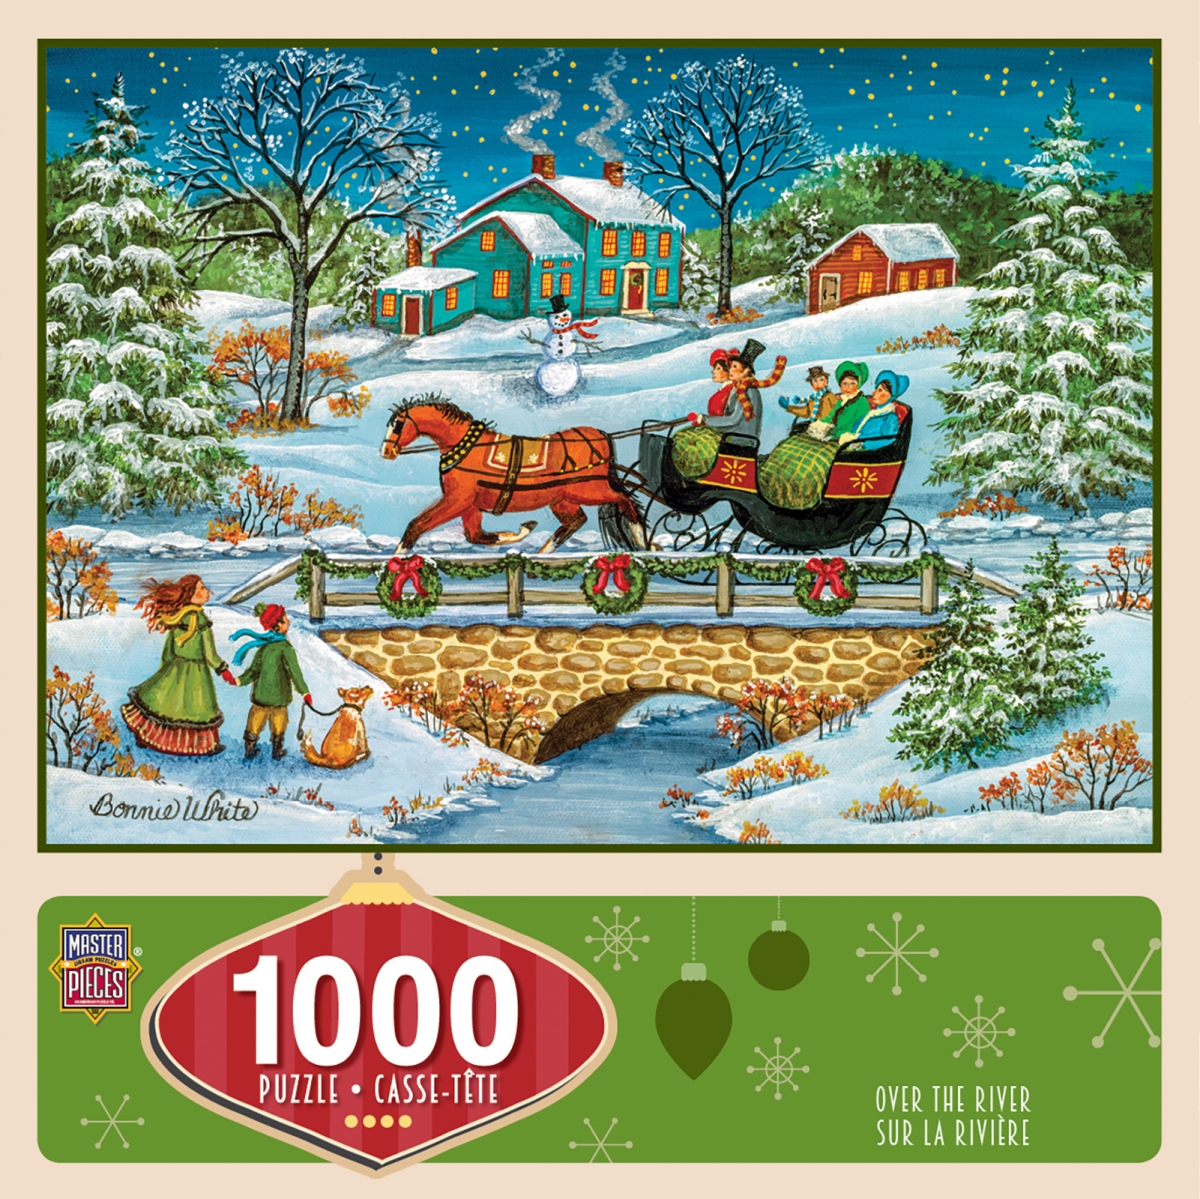 71774 19.25 X 26.75 In. Bonnie White Holiday Over The River Jigsaw Puzzle - 1000 Piece